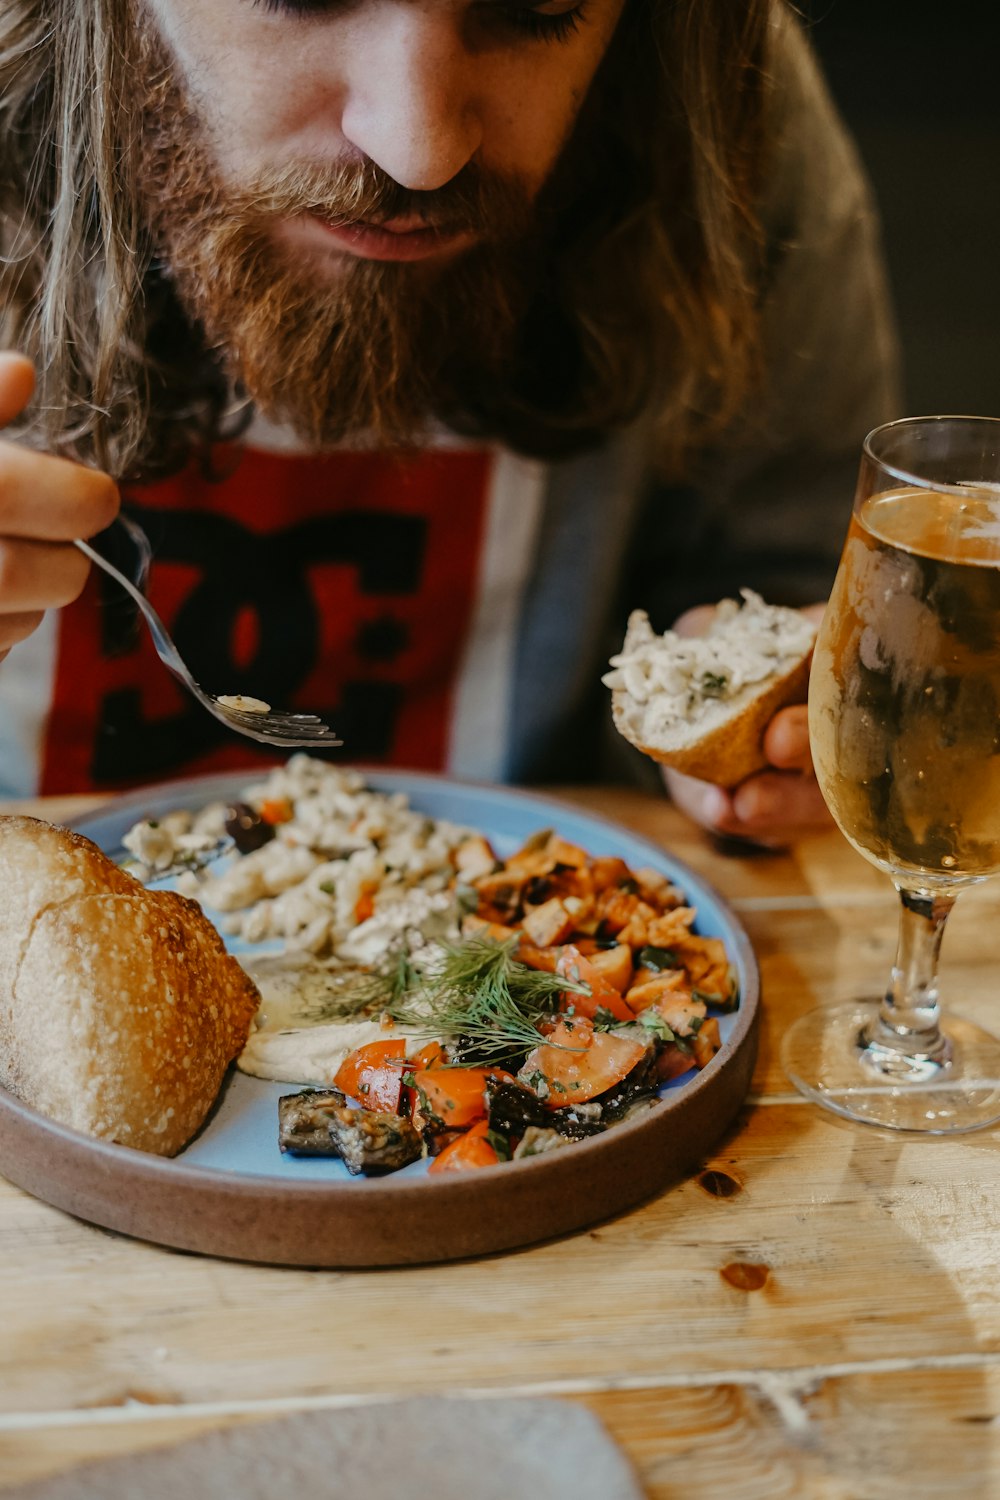 man eating bread and plate near filled wine glass